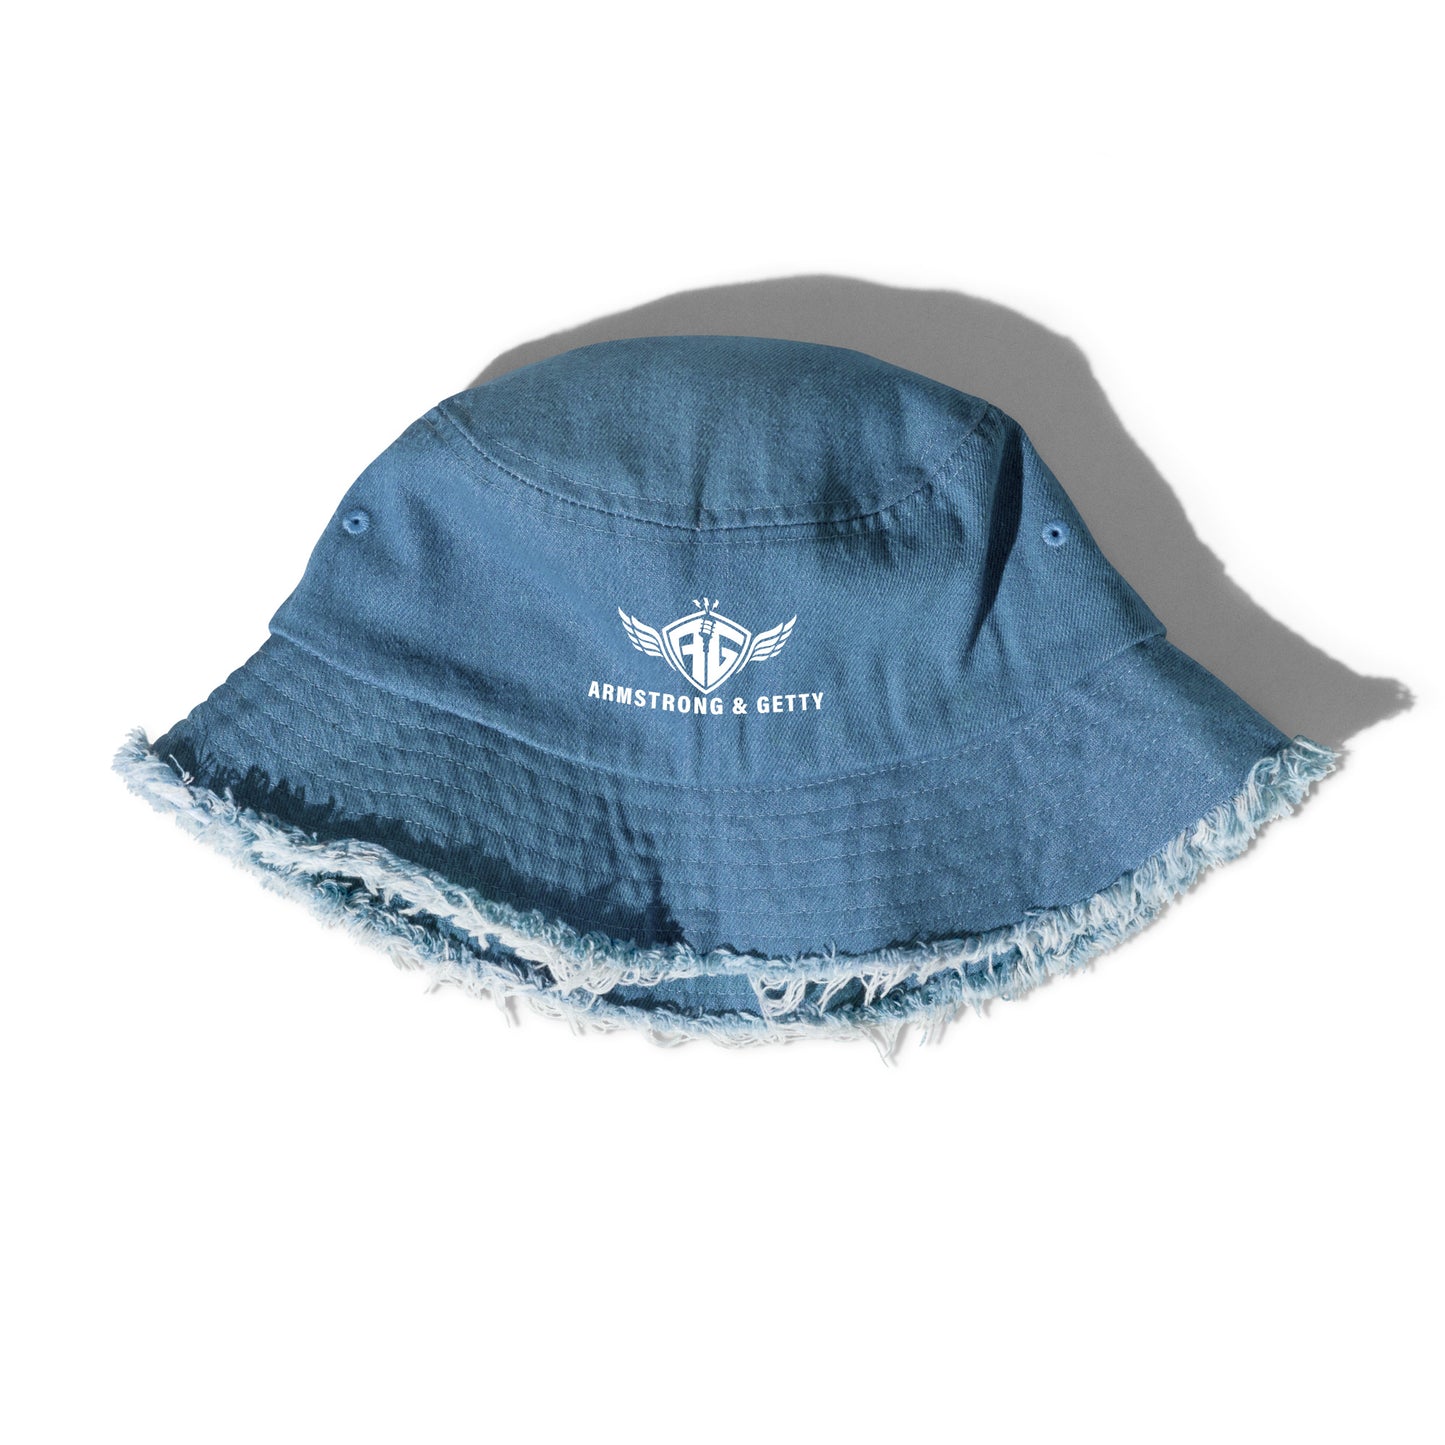 The A&G Air Force Distressed Denim Bucket Hat